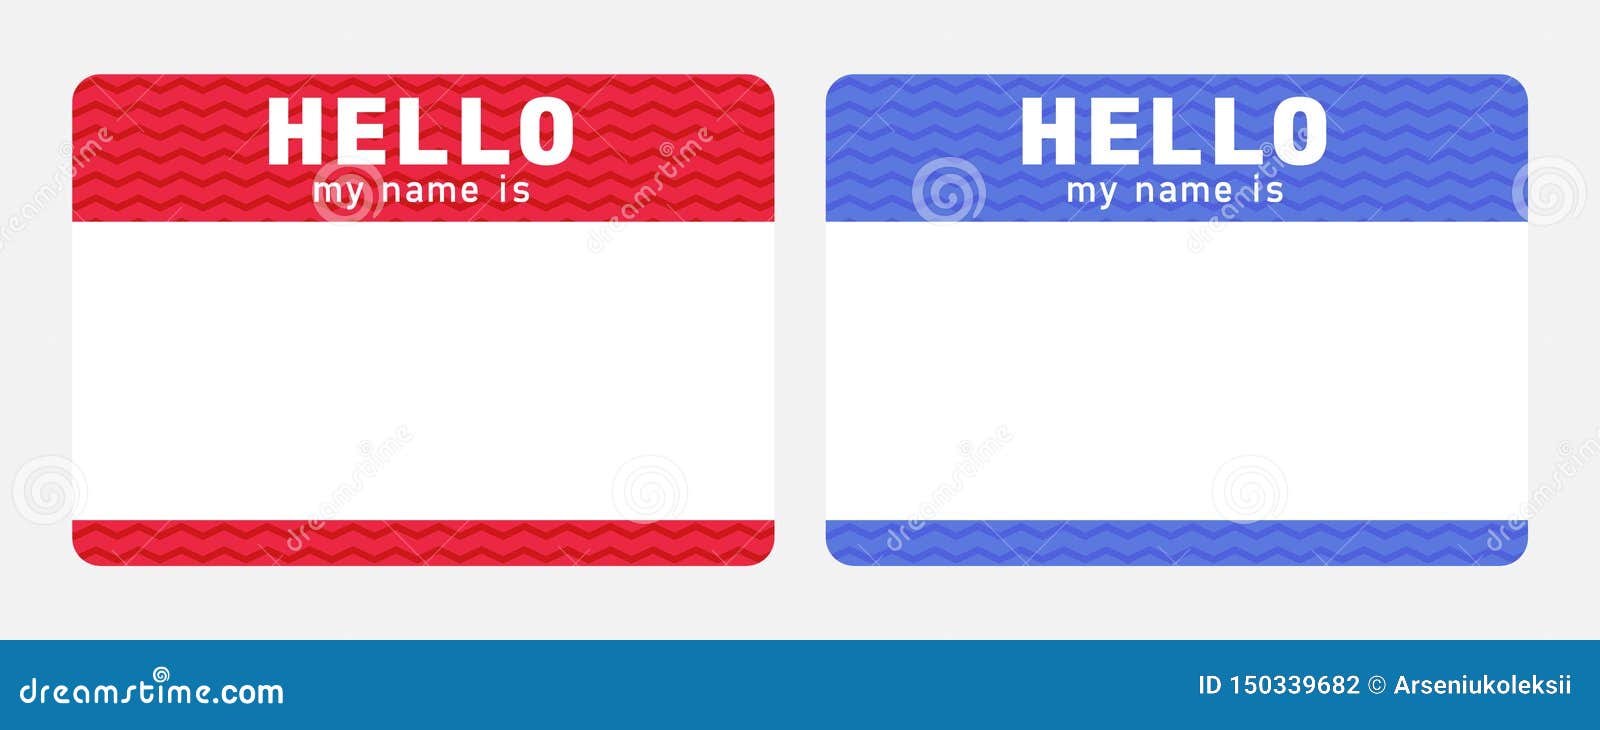 hello my name is - sticker